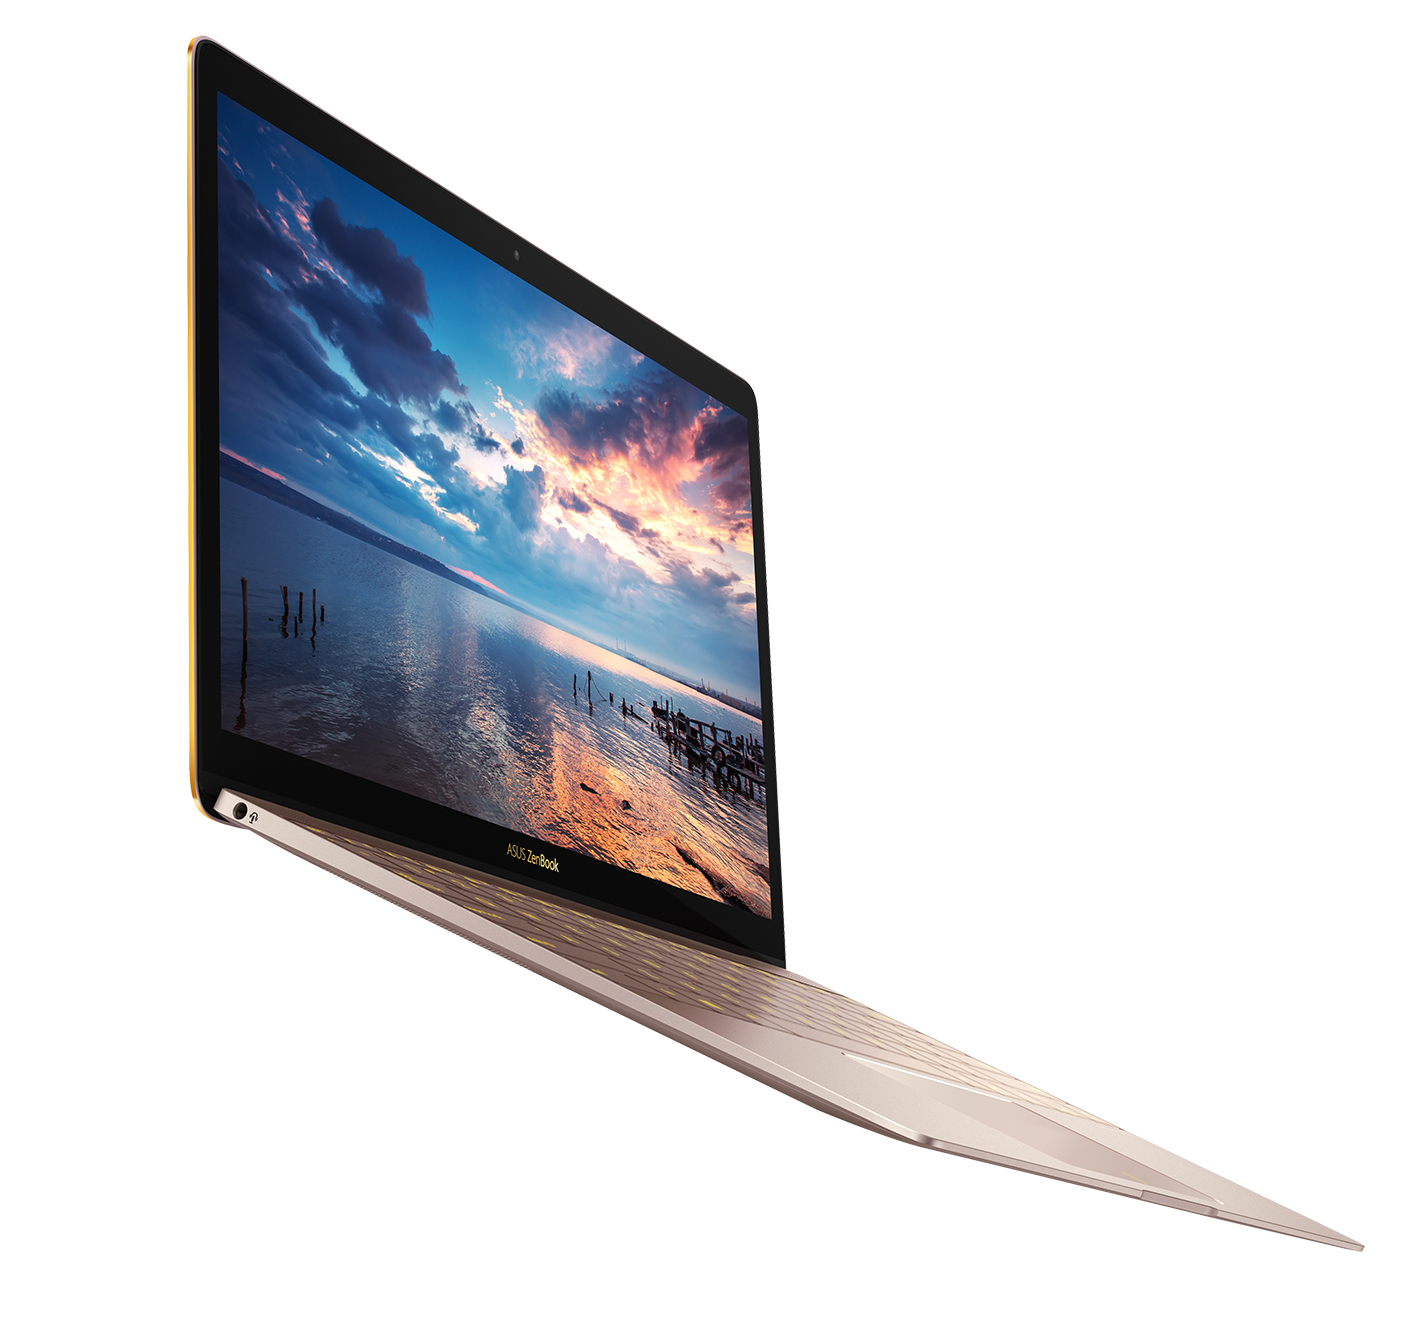 The ASUS ZenBook 3 with Windows 10